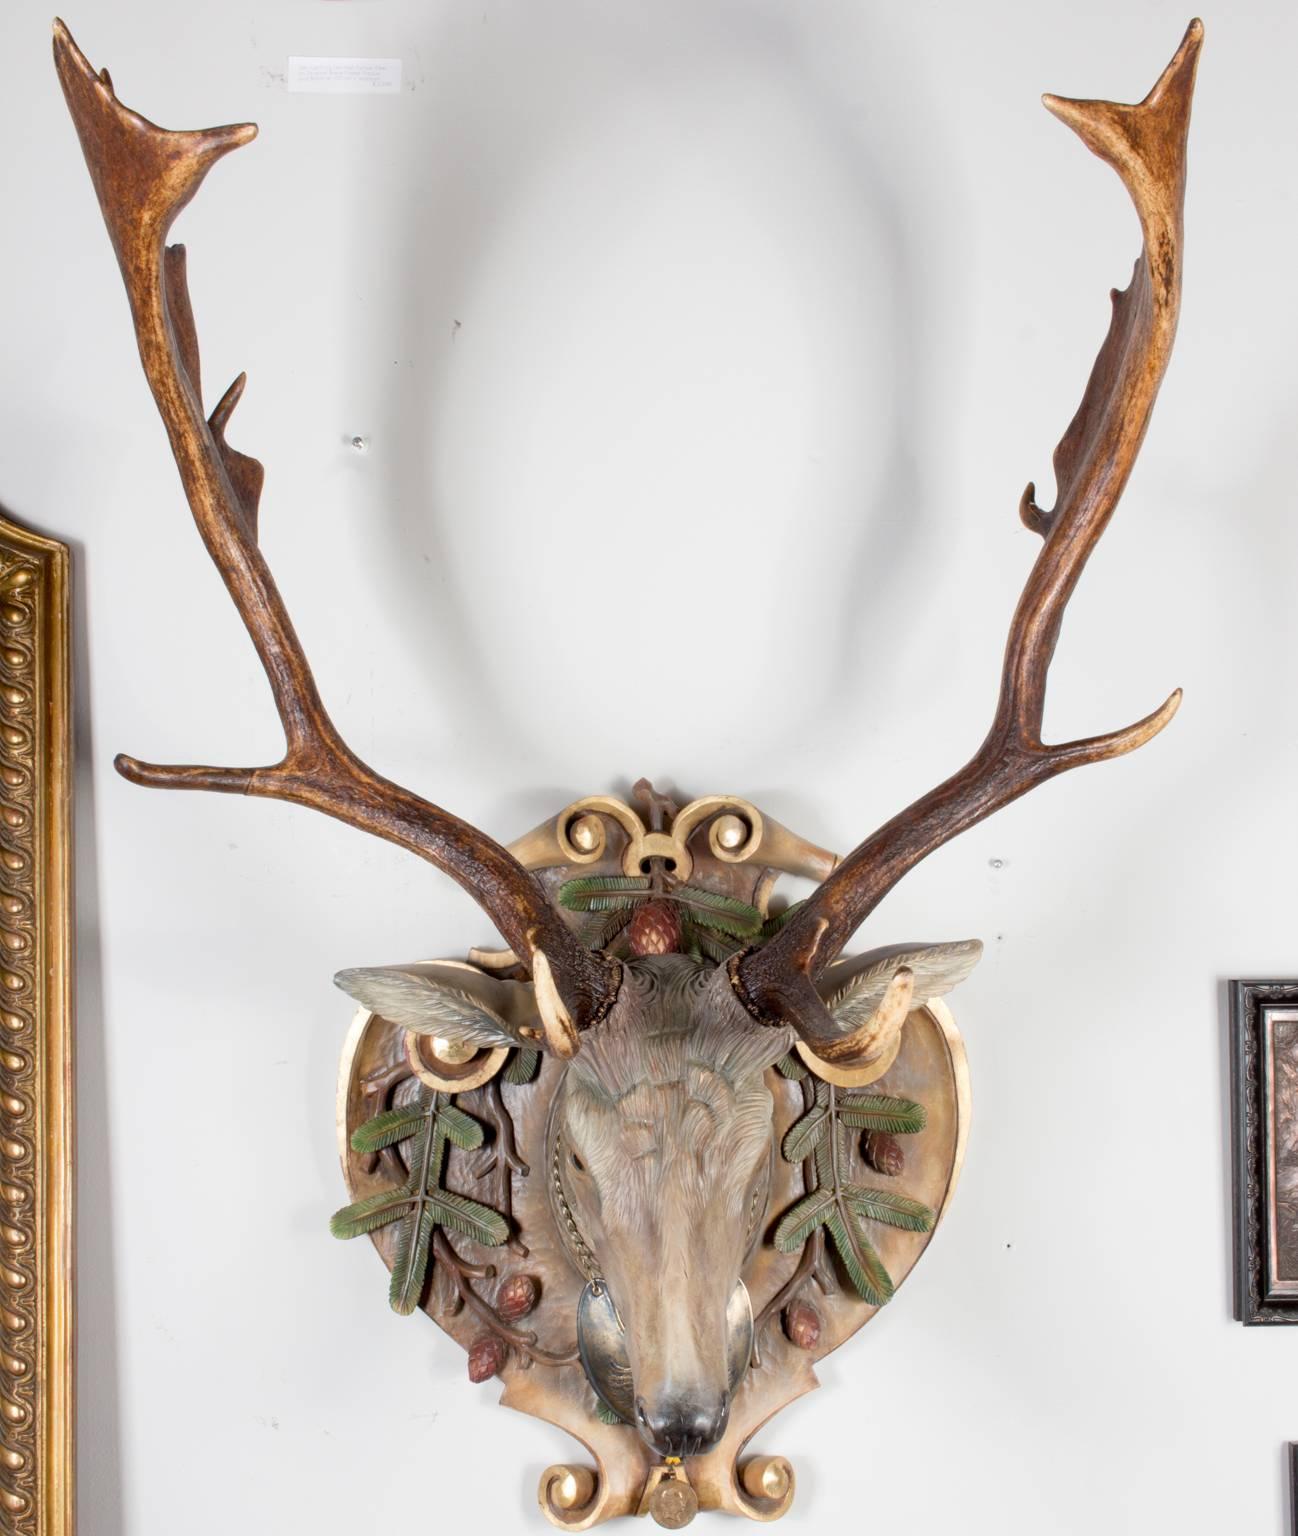 A stunning and very lifelike hand-carved linden wood Fallow deer with Italian polychrome painting technique with antique Habsburg antlers from the Eckartsau Castle of Emperor Franz Josef in the Southern Austrian Alps, a favorite hunting schloss of